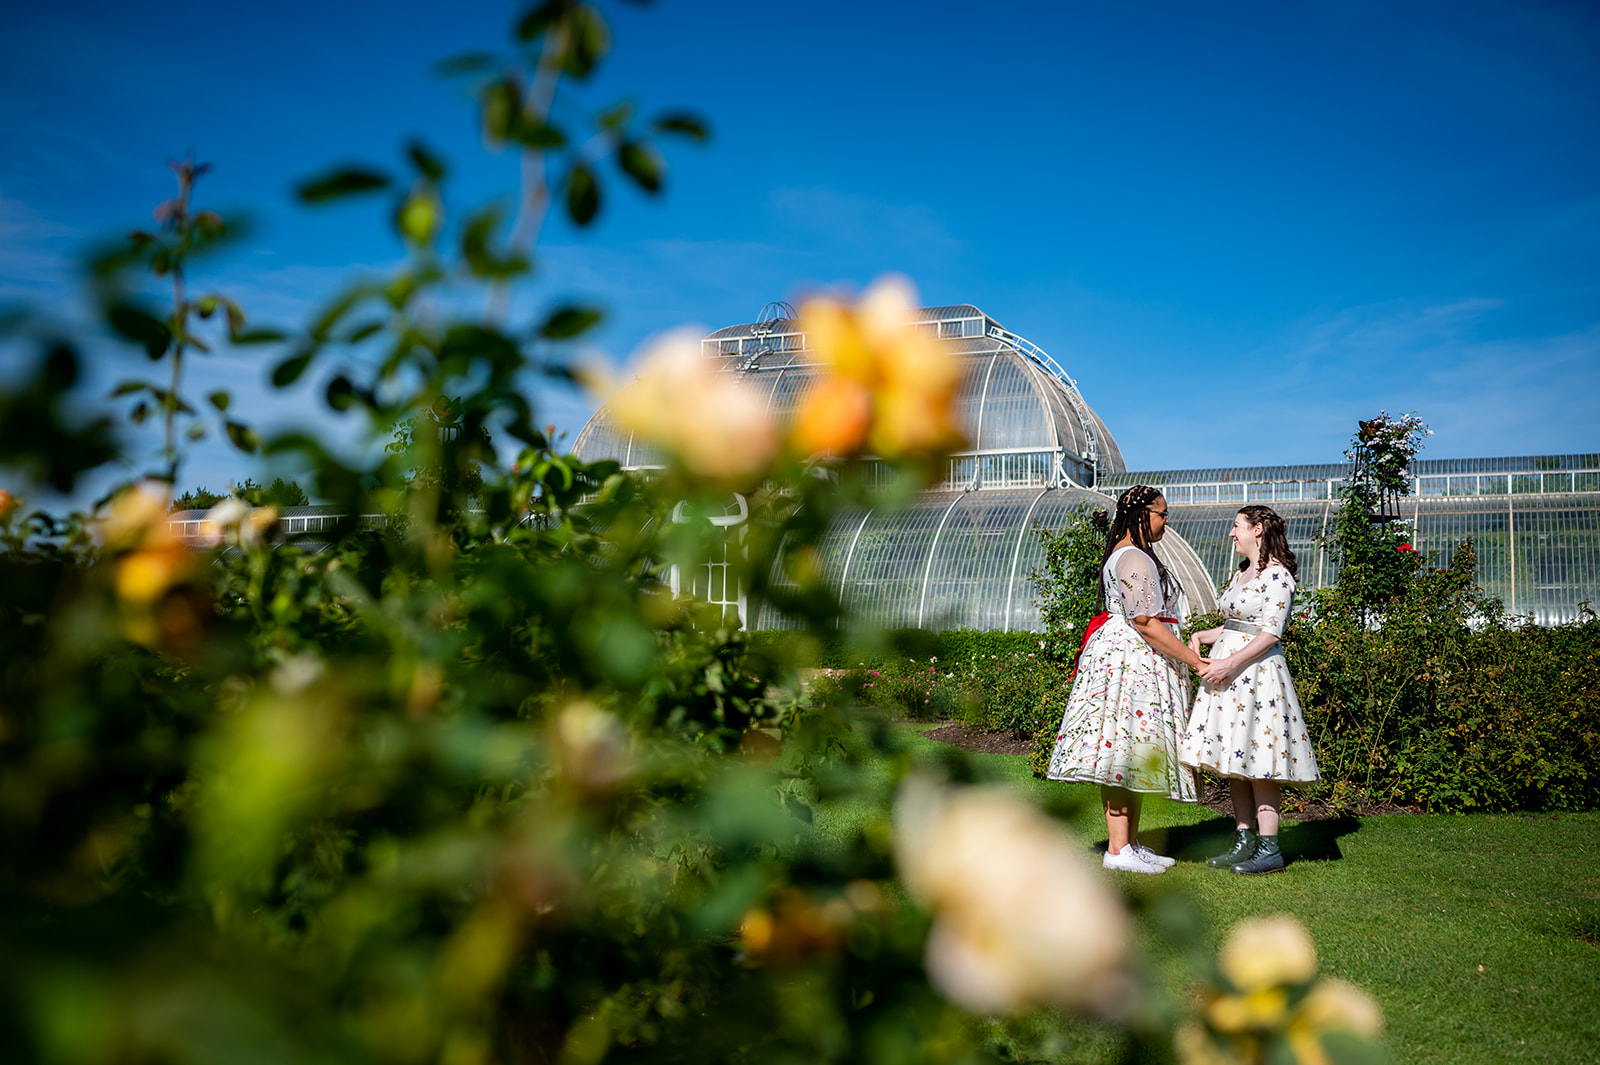 Two brides standing in front of the Palm House at Kew Gardens on their wedding day.